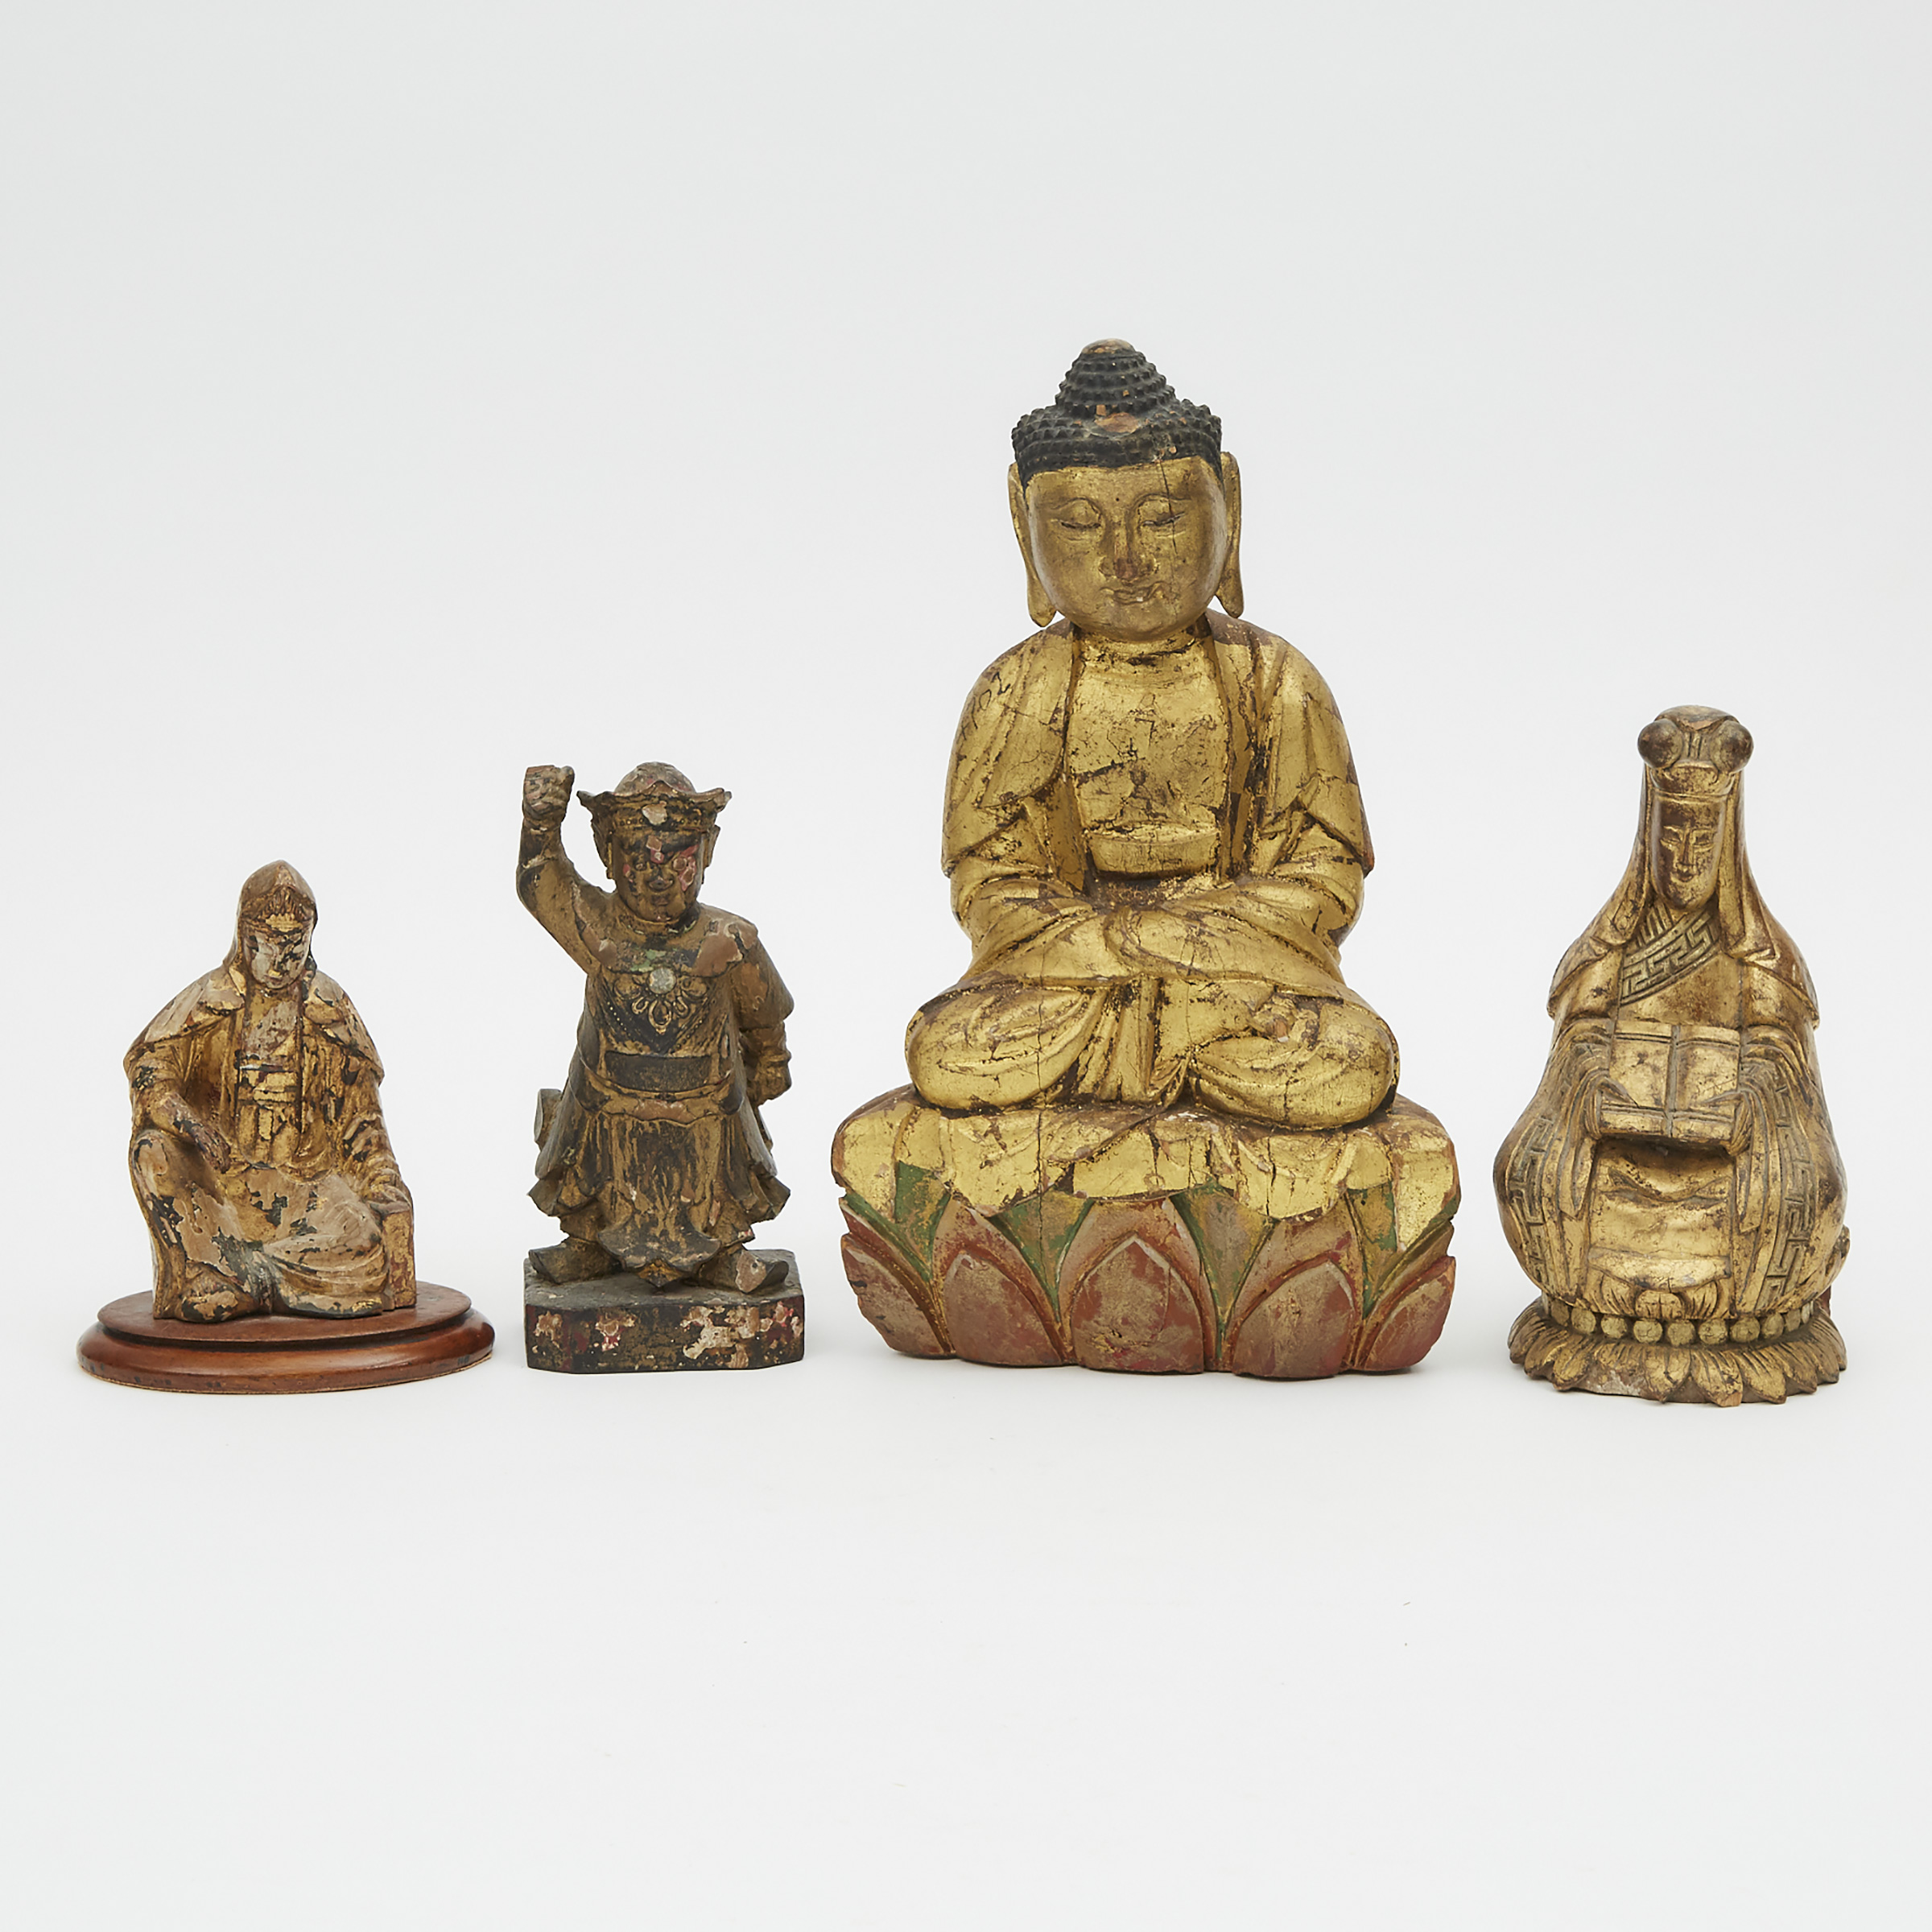 A Group of Four Gilt Lacquer Wood Figures, 18th Century and Later